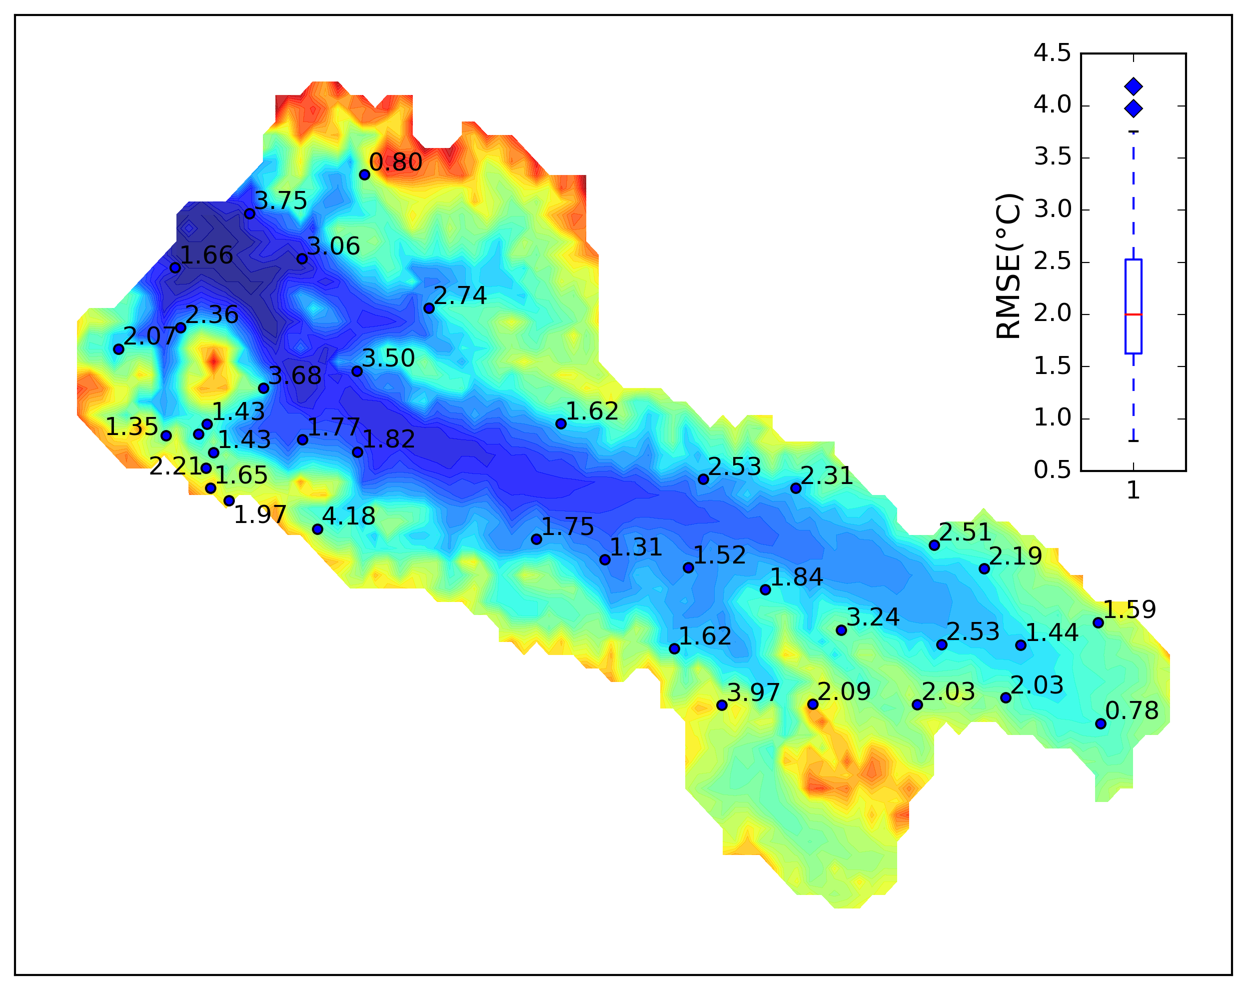 Simulated soil temperature and moisture in the Babao River Basin